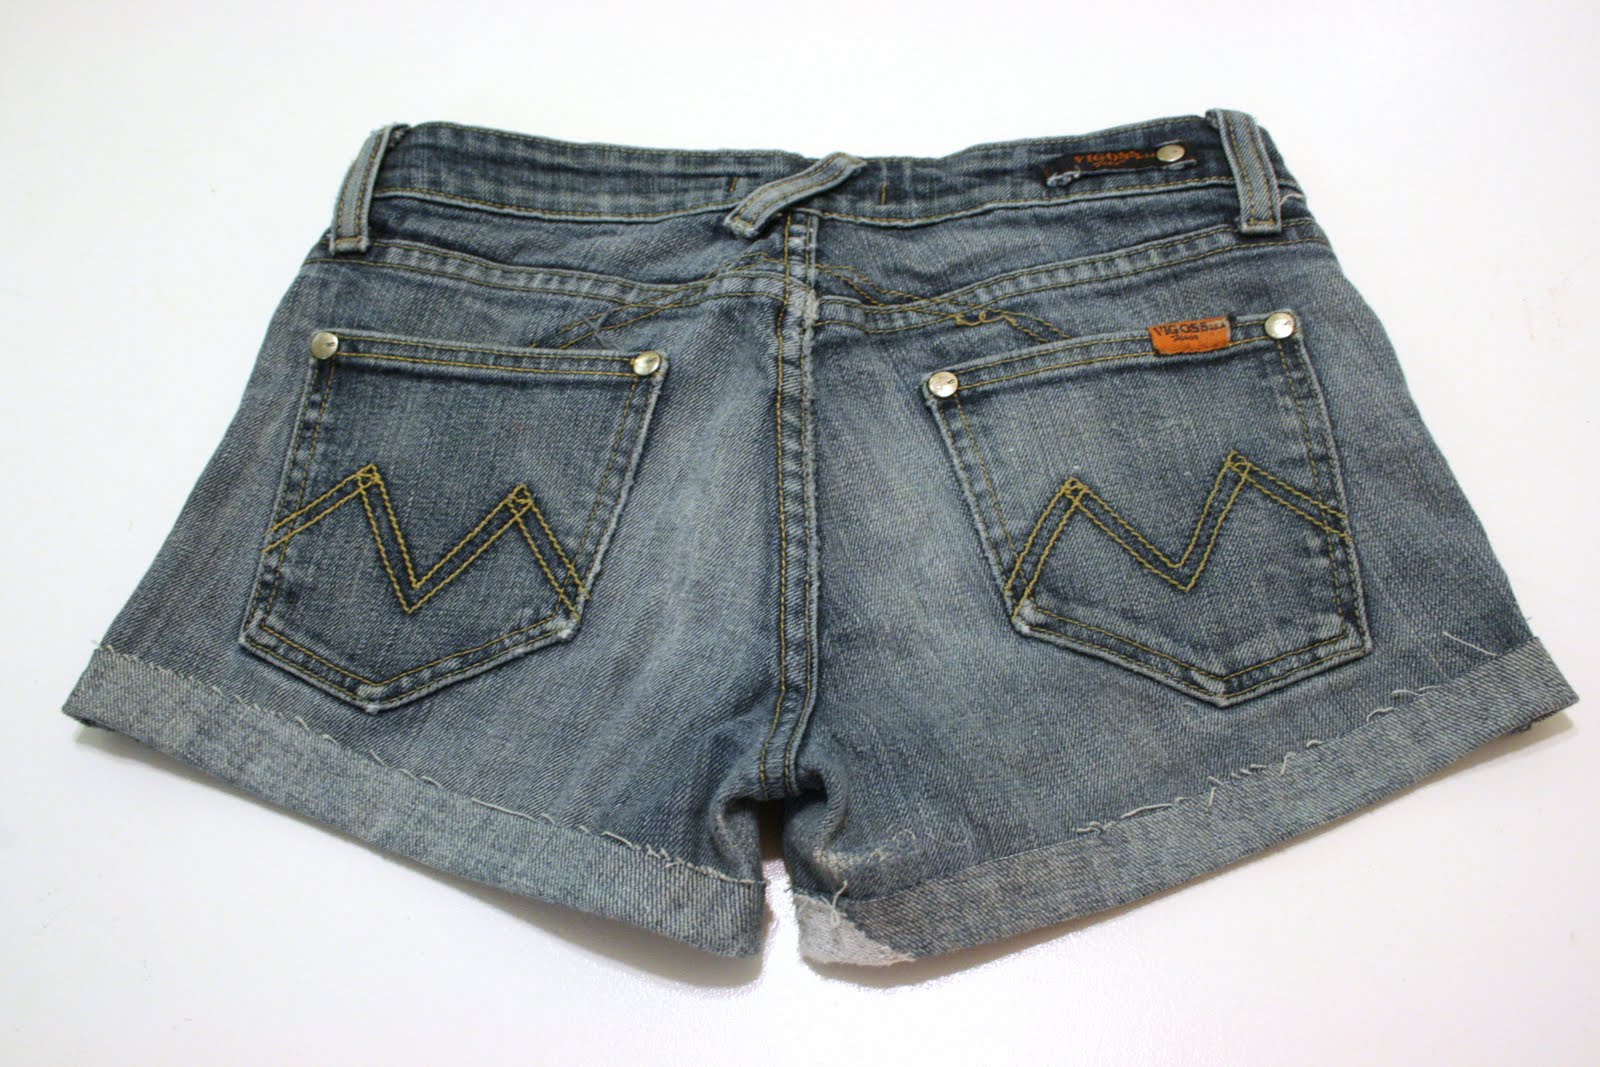 DIY, HOW TO MAKE 90s HIGH WAISTED CUFFED SHORTS FROM MOM JEANS